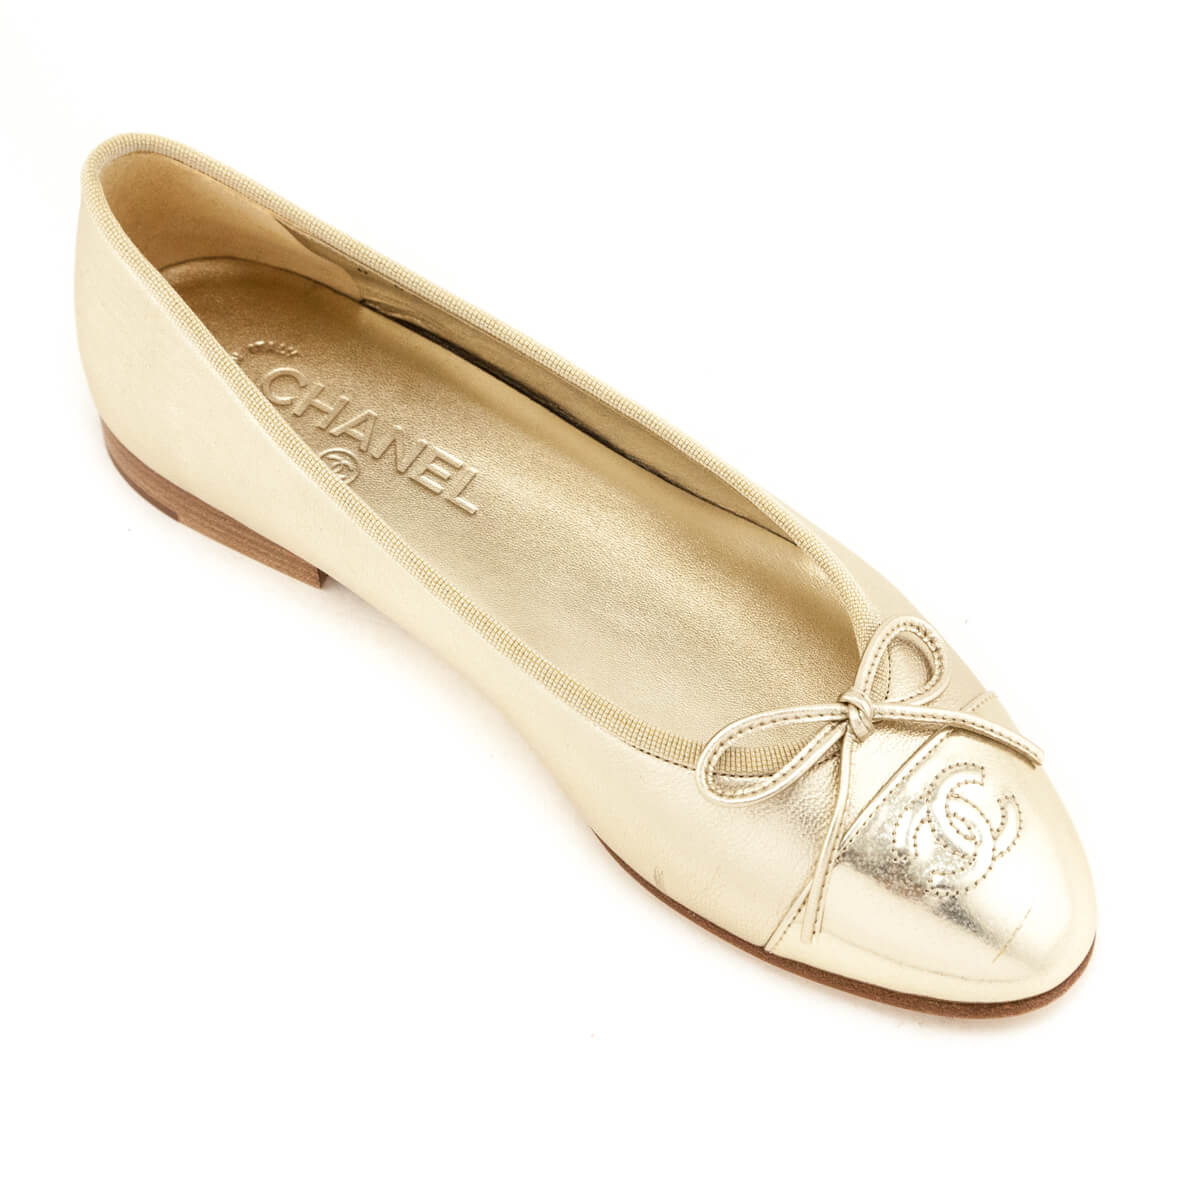 Chanel Gold Cap Toe Ballet Flats Size US 8 | EU 38 - Love that Bag etc - Preowned Authentic Designer Handbags & Preloved Fashions